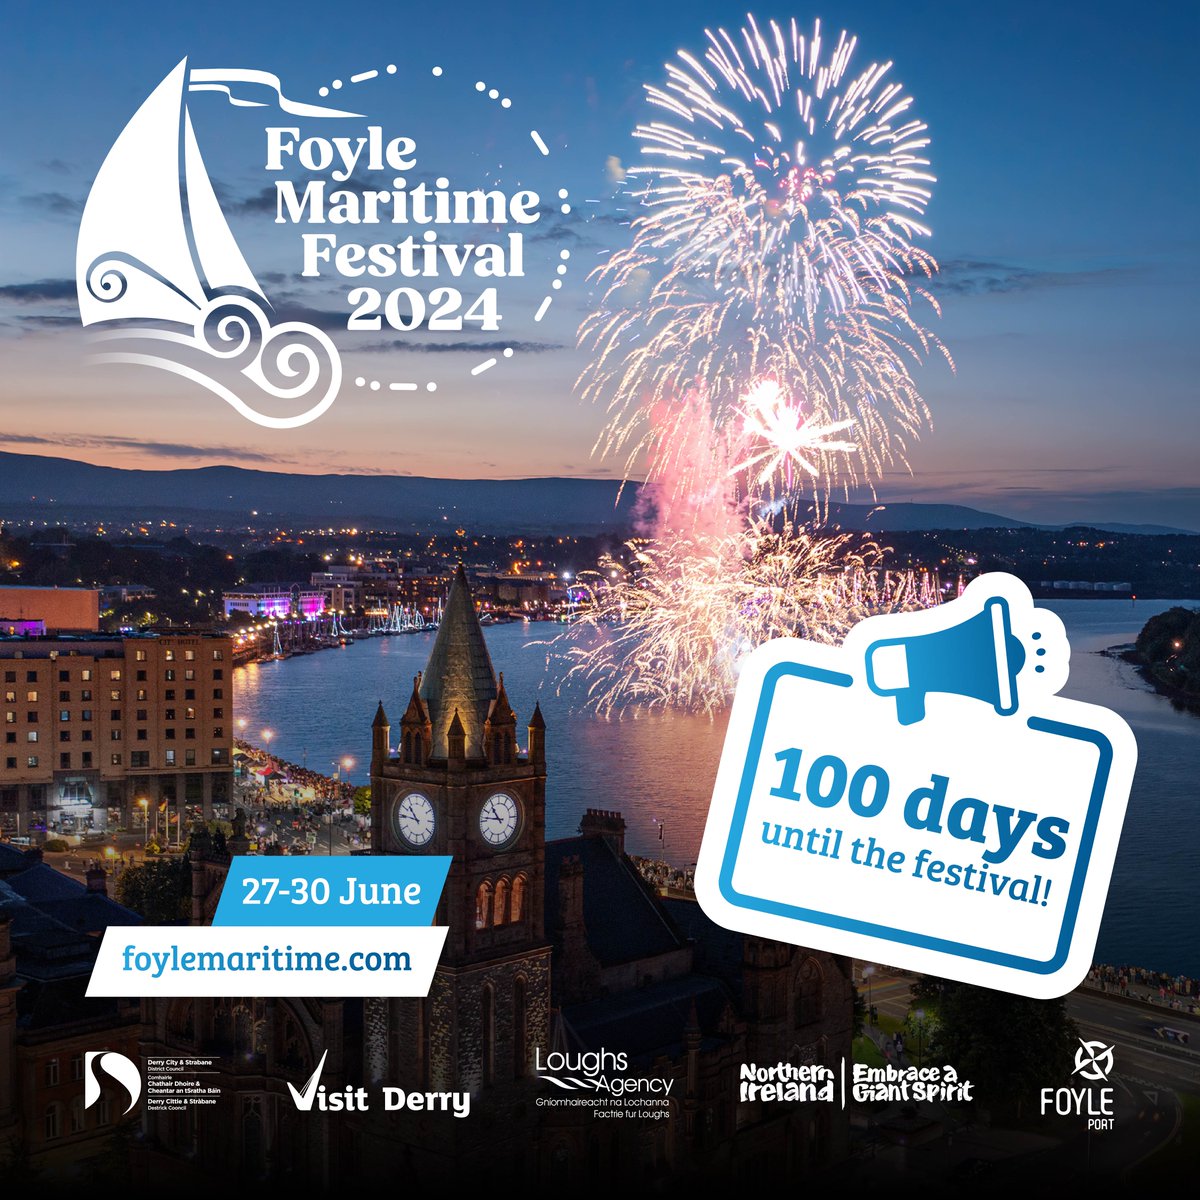 We are officially 100 days away from the Foyle Maritime Festival! 🎉 Have you started planning your trip? We have lots of amazing activities and displays for you all! Don't miss out—start planning your maritime adventure now! ⛵🌊 #FoyleMaritimeFestival #mygiantadventure